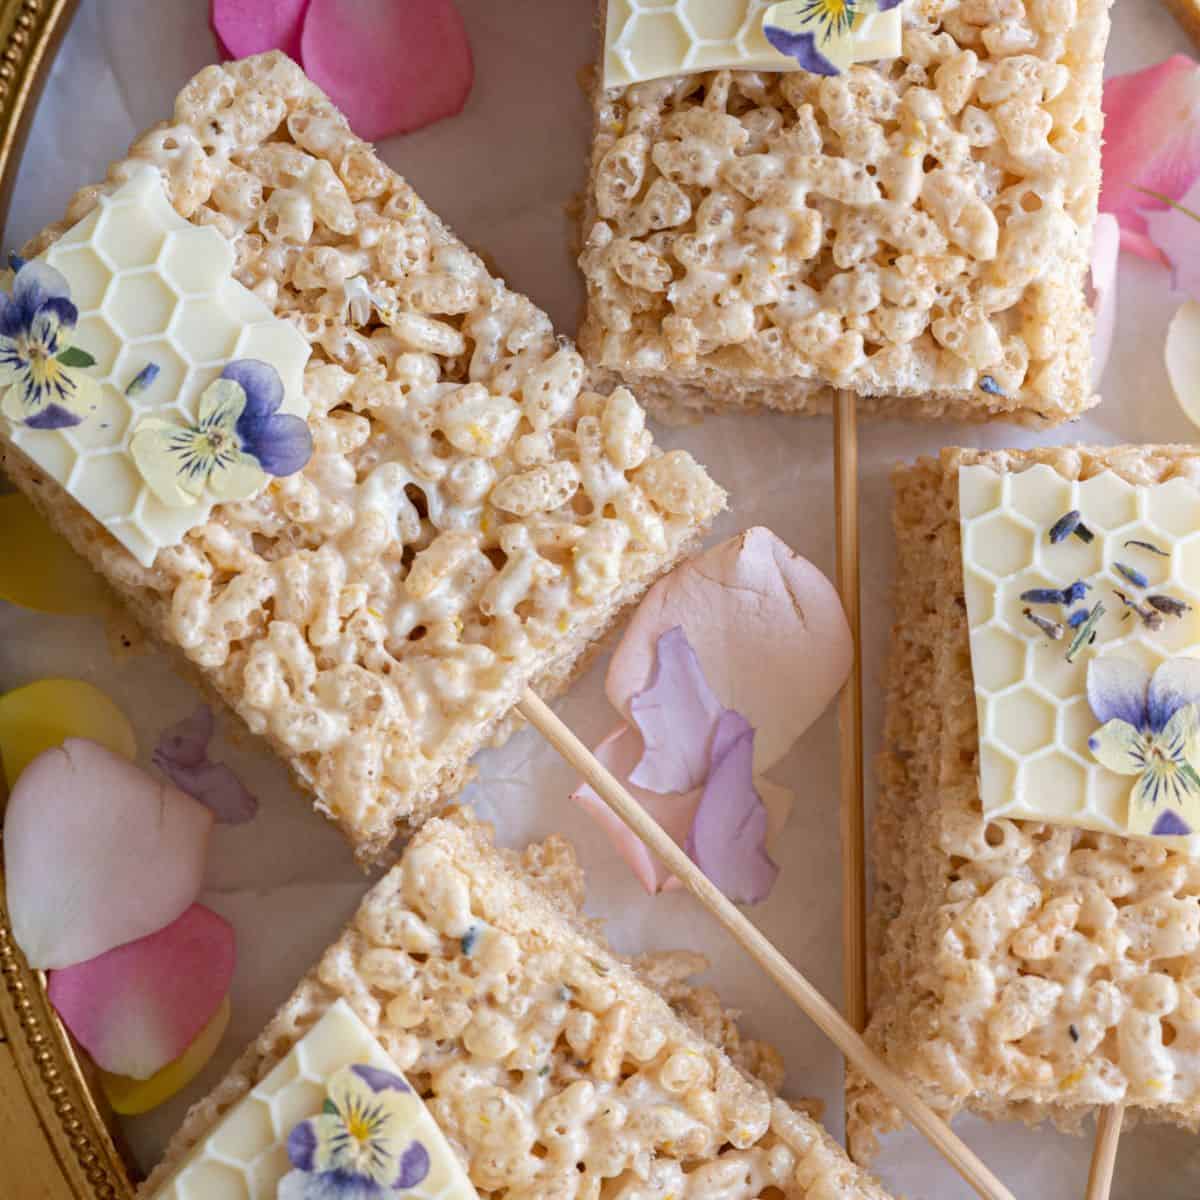 close up shot of perfectly rectangular rice krispy treat surrounded by pale pastel flower petals garnished with white chocolate honey comb and mini purple and yellow pansy flowers with wooden sticks in the center